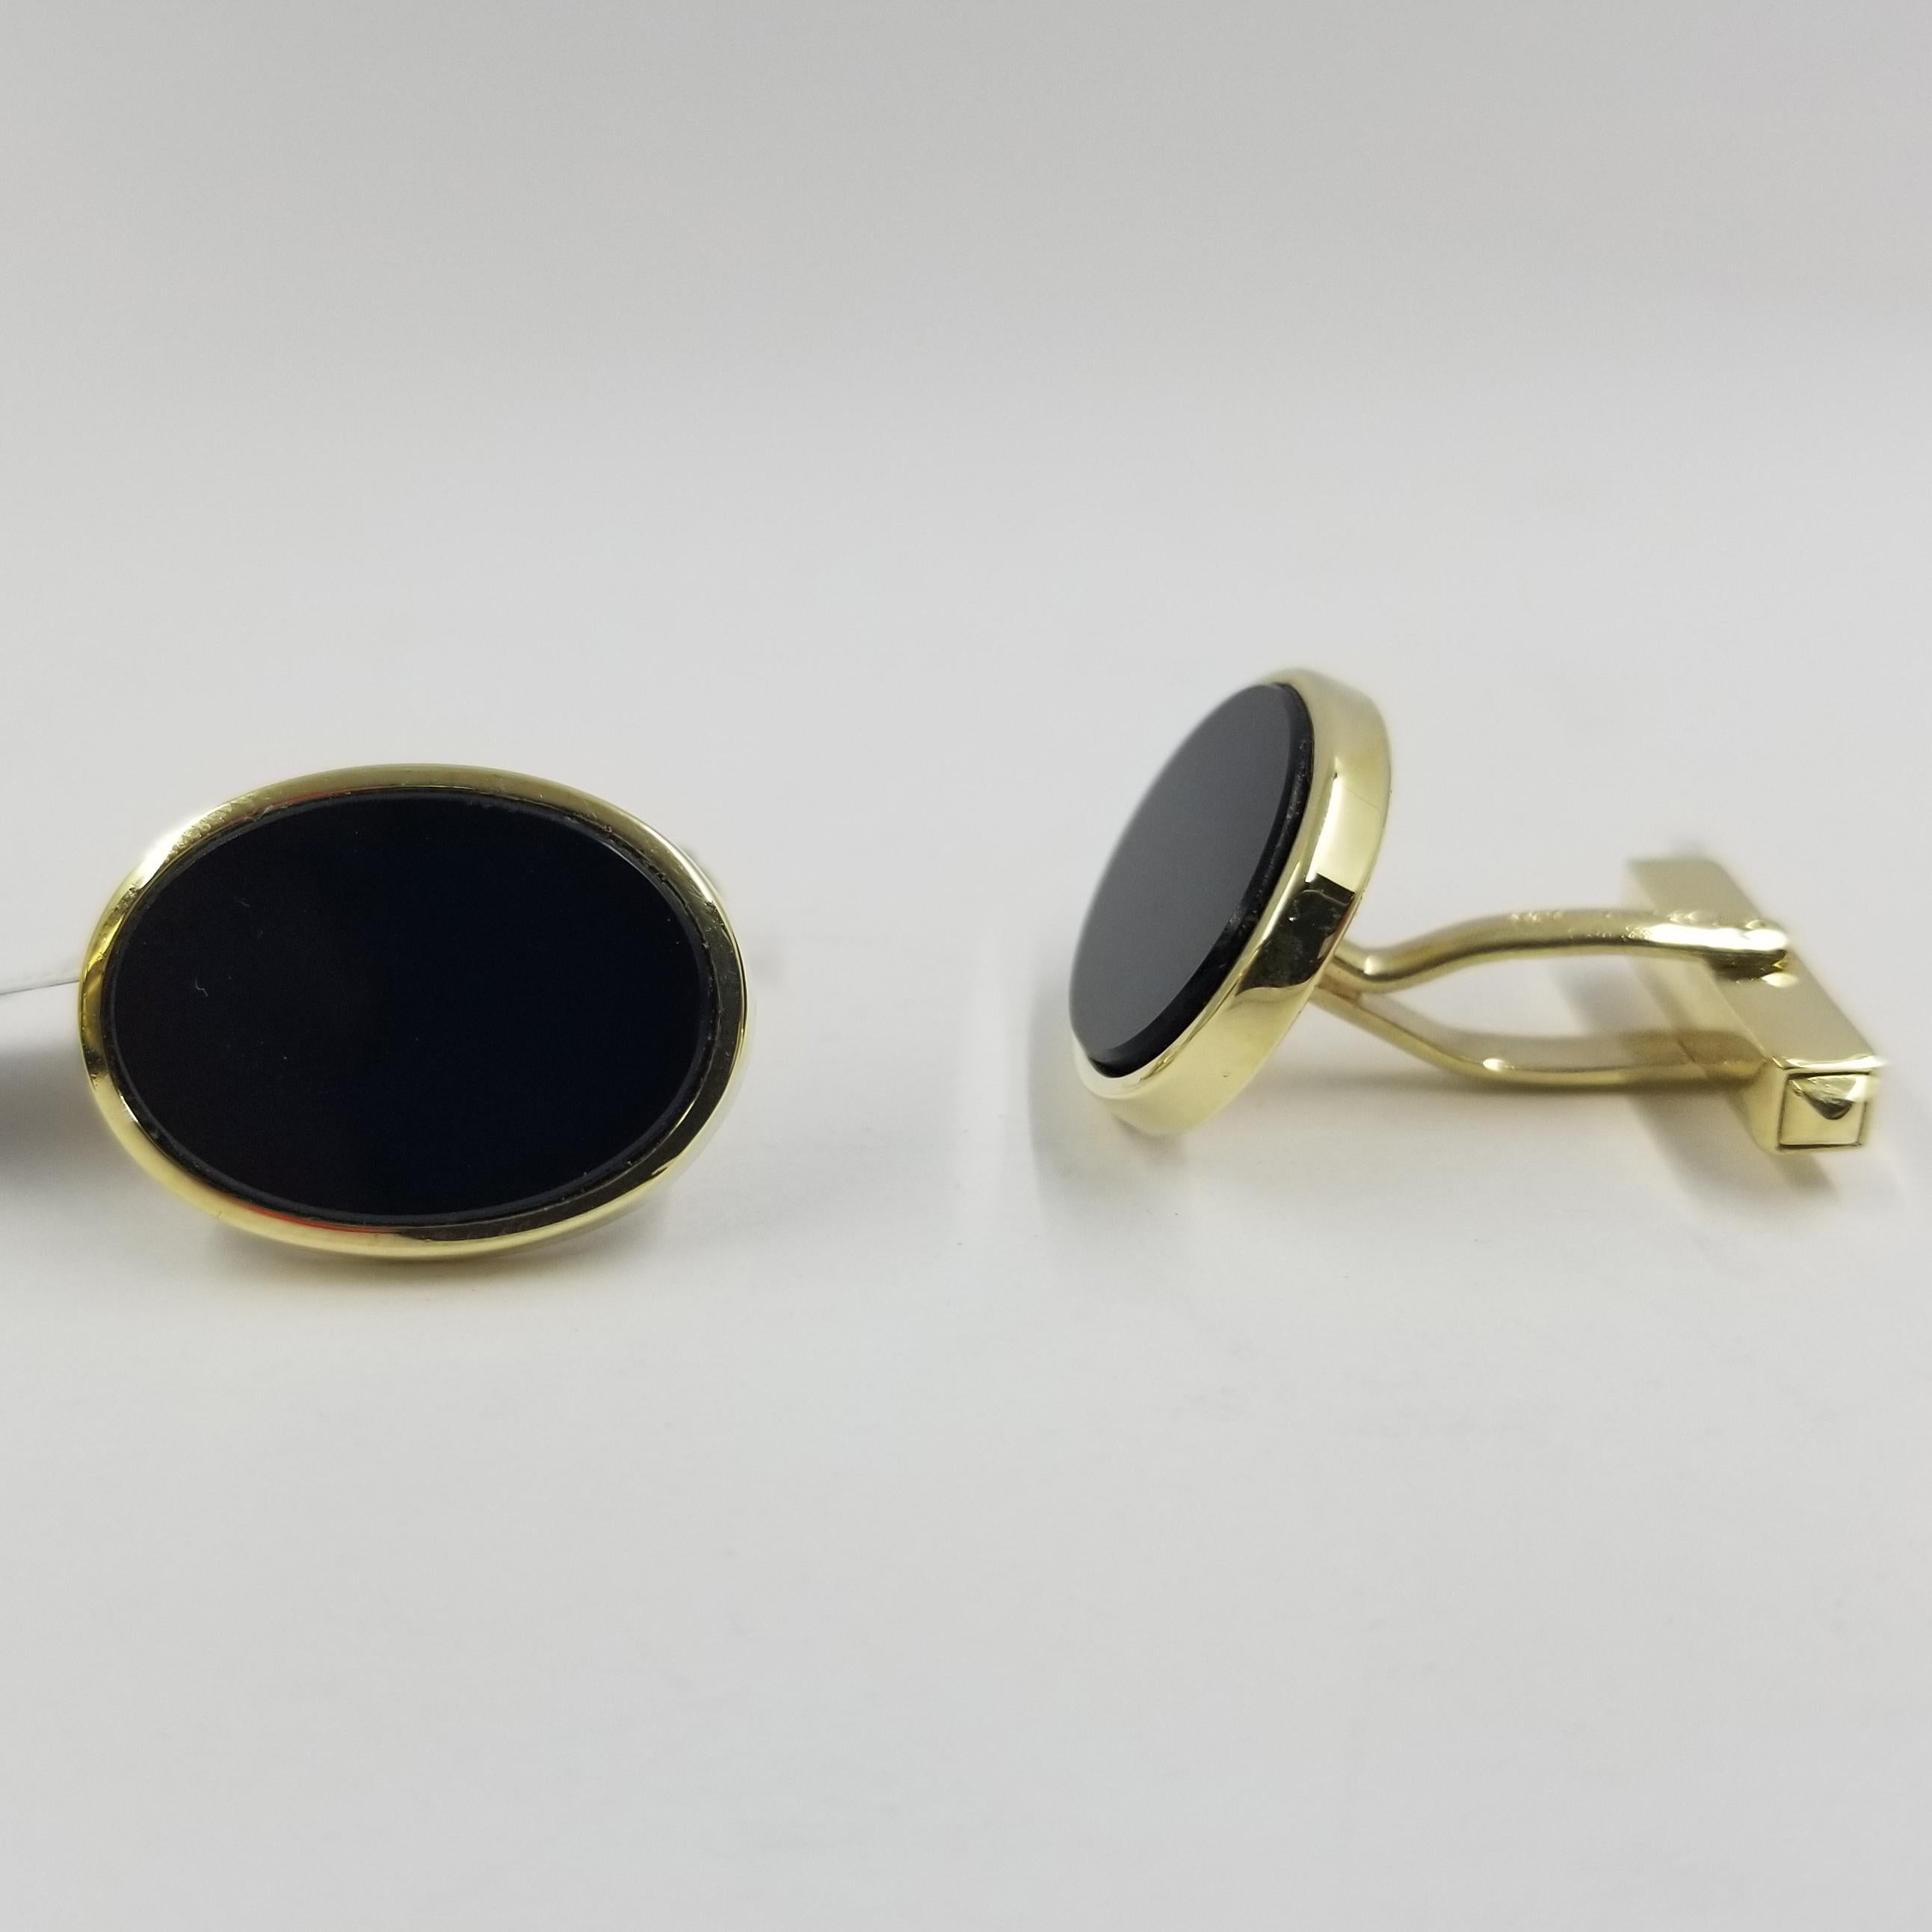 Set of 2 cufflinks crafted in 14 karat yellow gold (stamped). The front is a polished bezel surrounding oval cut flat onyx. The backs are hinged for easy dressing.